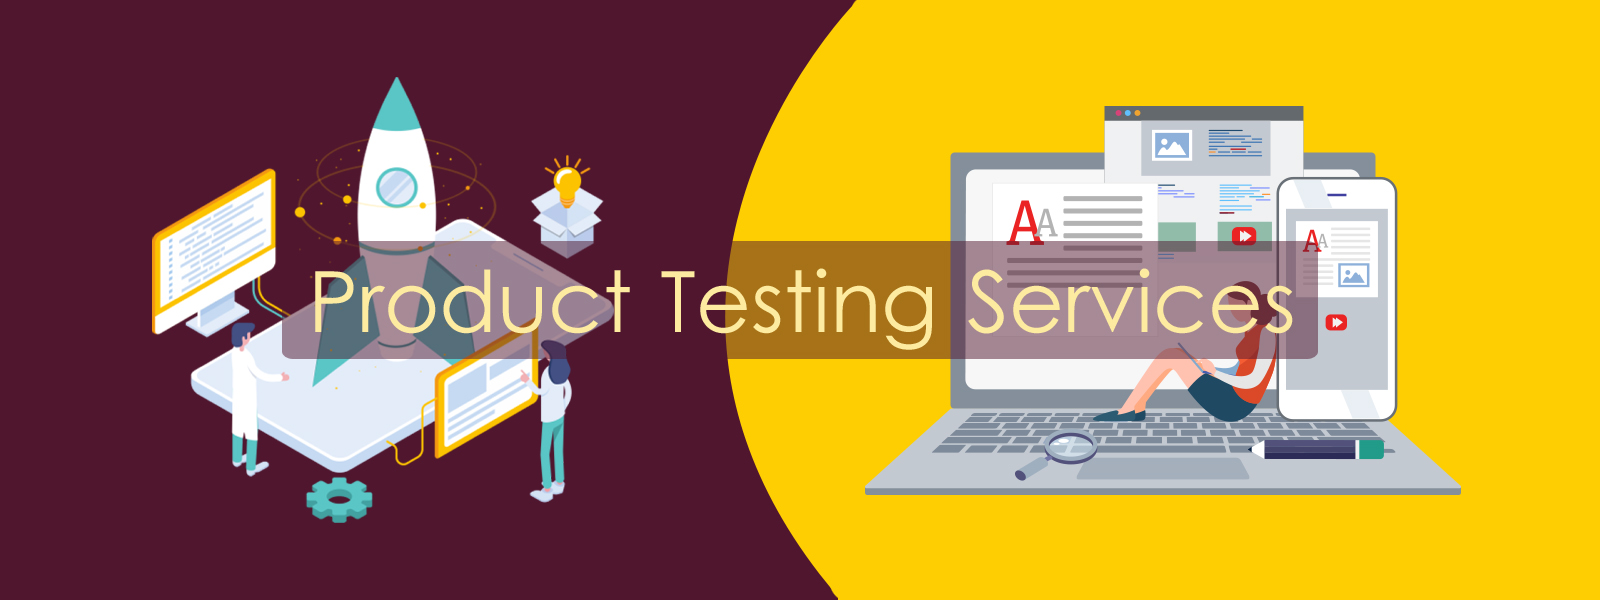 Product Testing Services